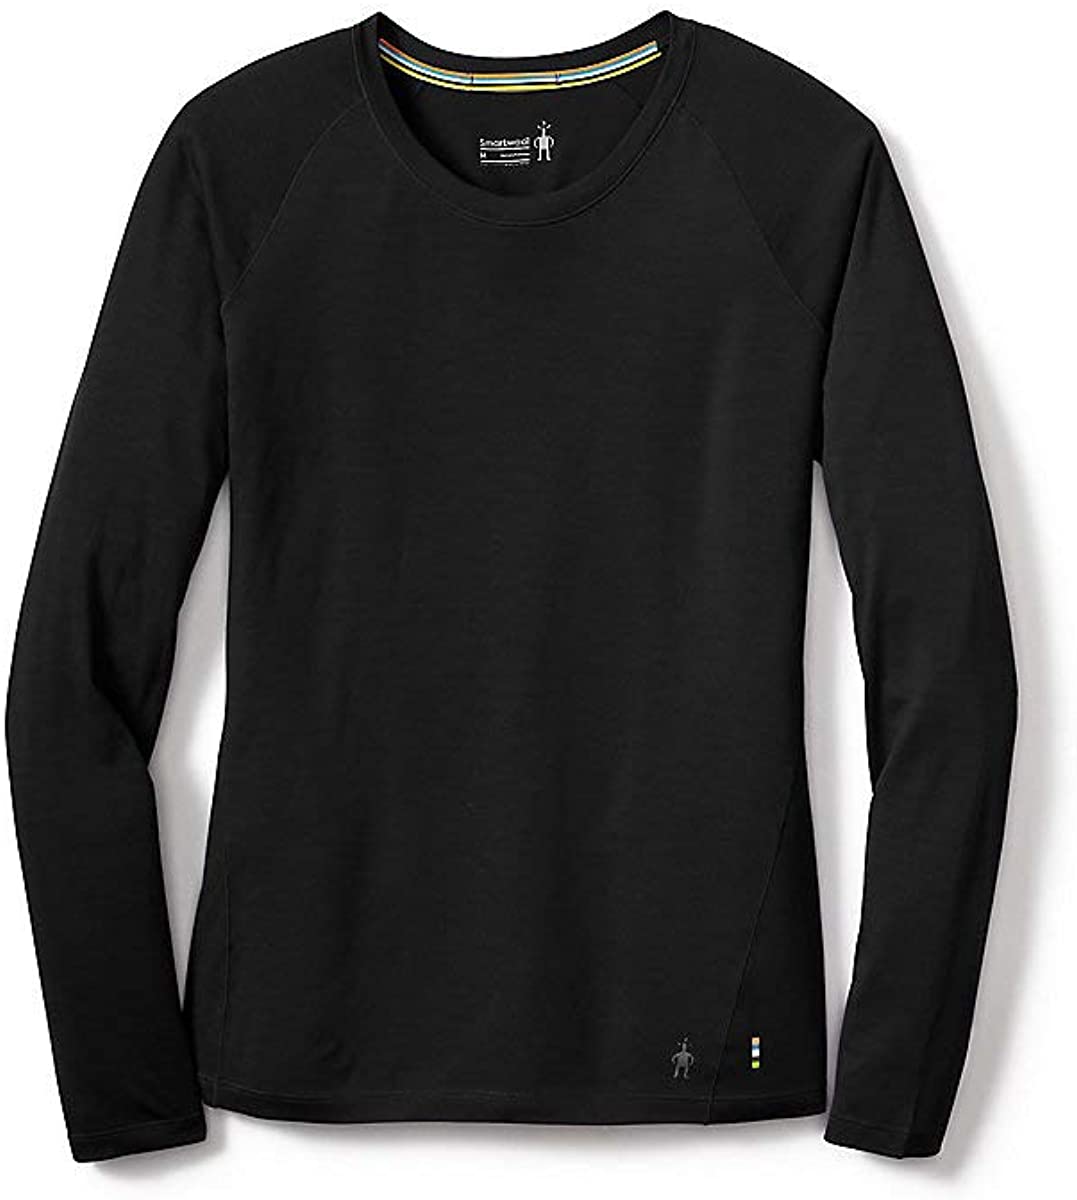 Women's Smartwool Merino 150 Base Layer Long Sleeve in Black from the side view